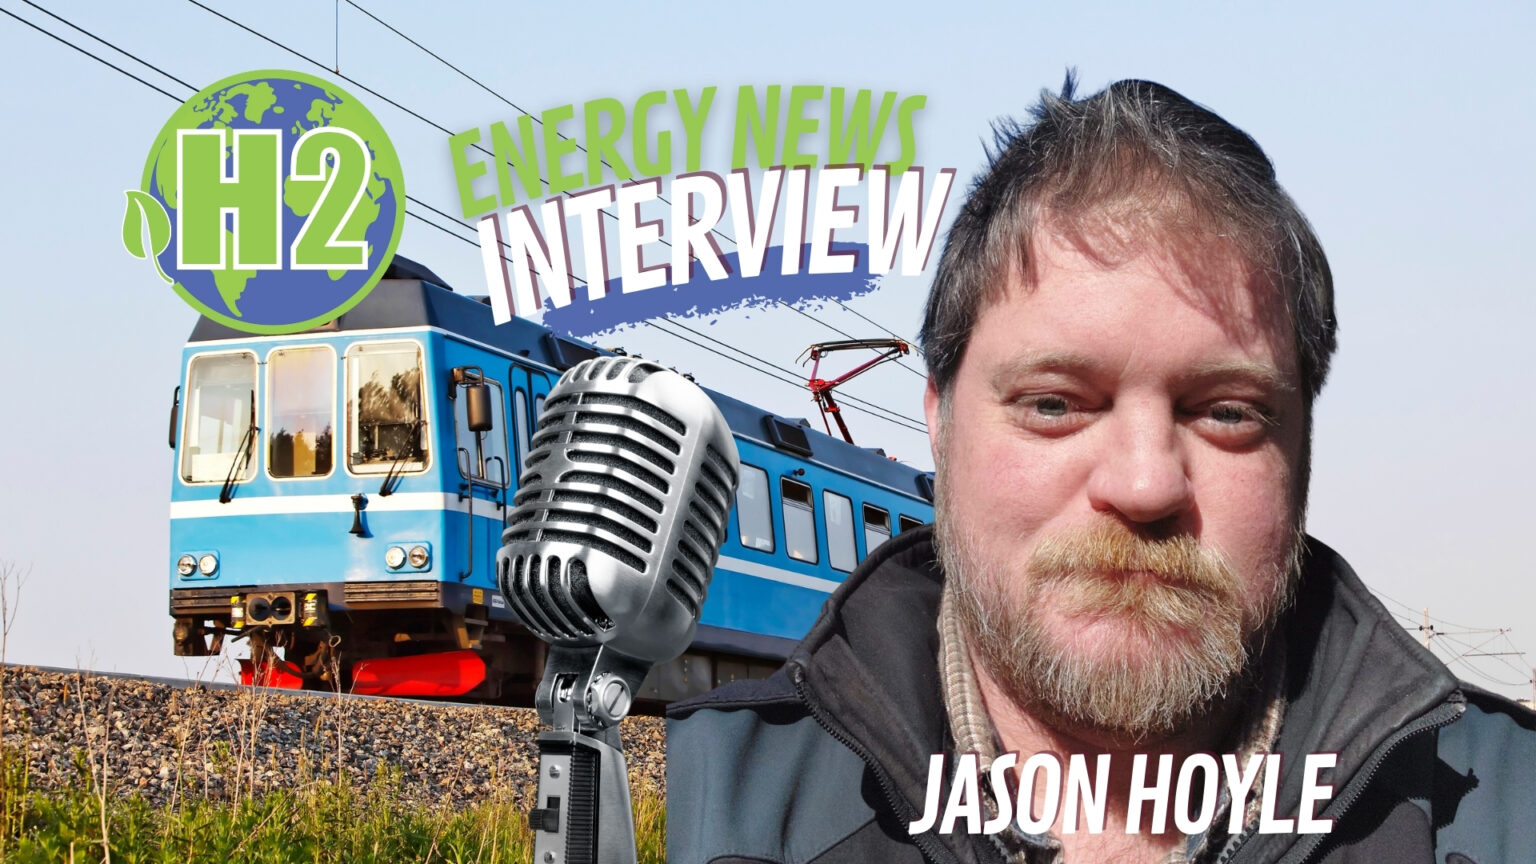 Major OEMs are on board when it comes to hydrail, interview with Jason Hoyle